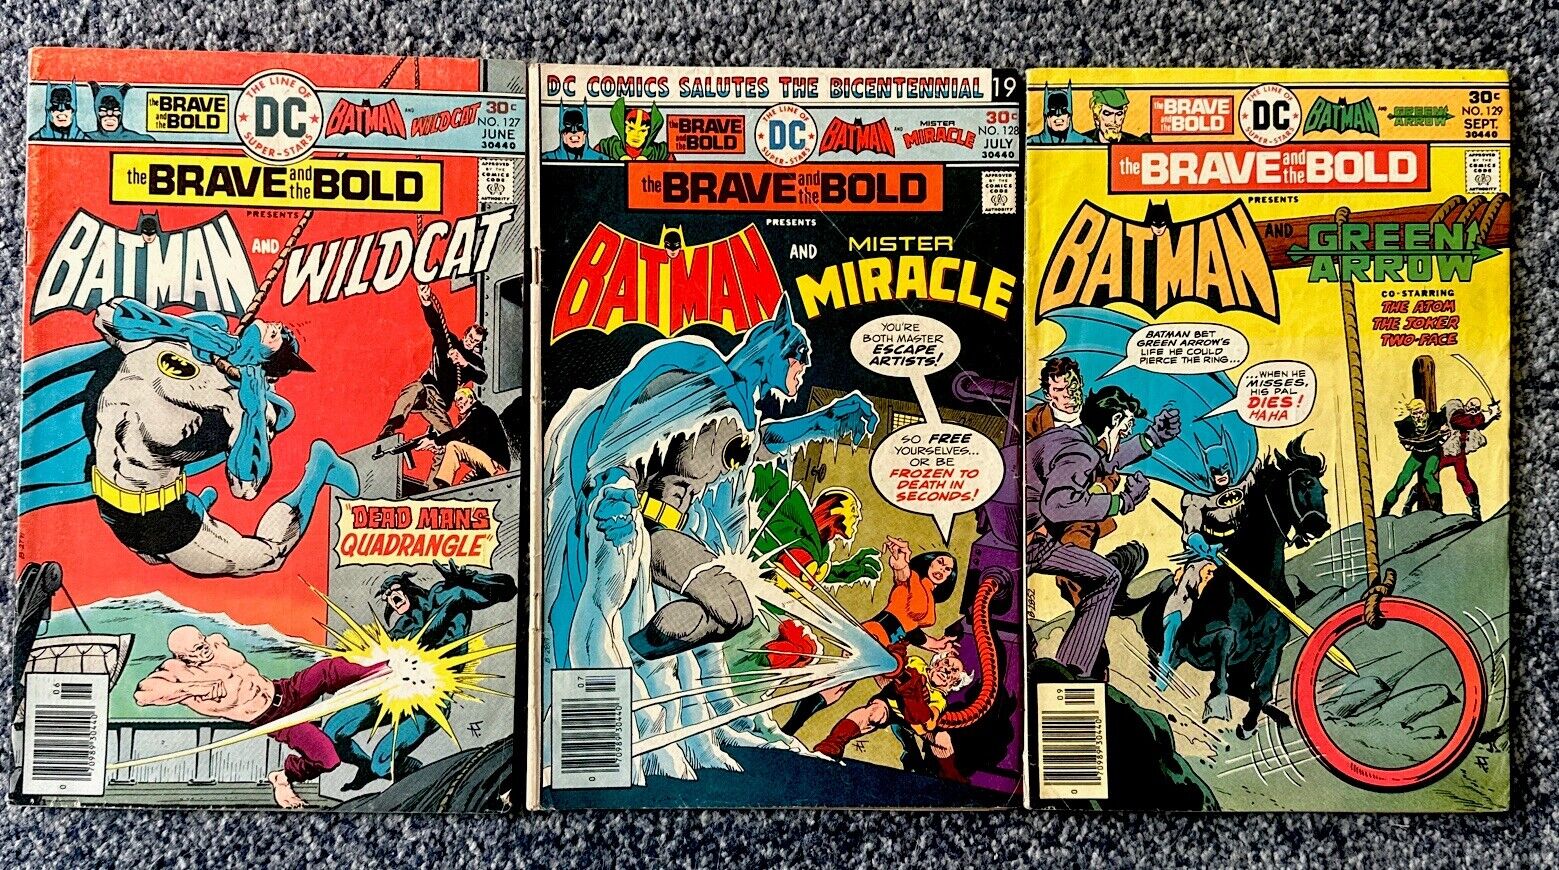 LOT - 3 issues - Brave and Bold present Batman and ... # 127 + 128 + 129